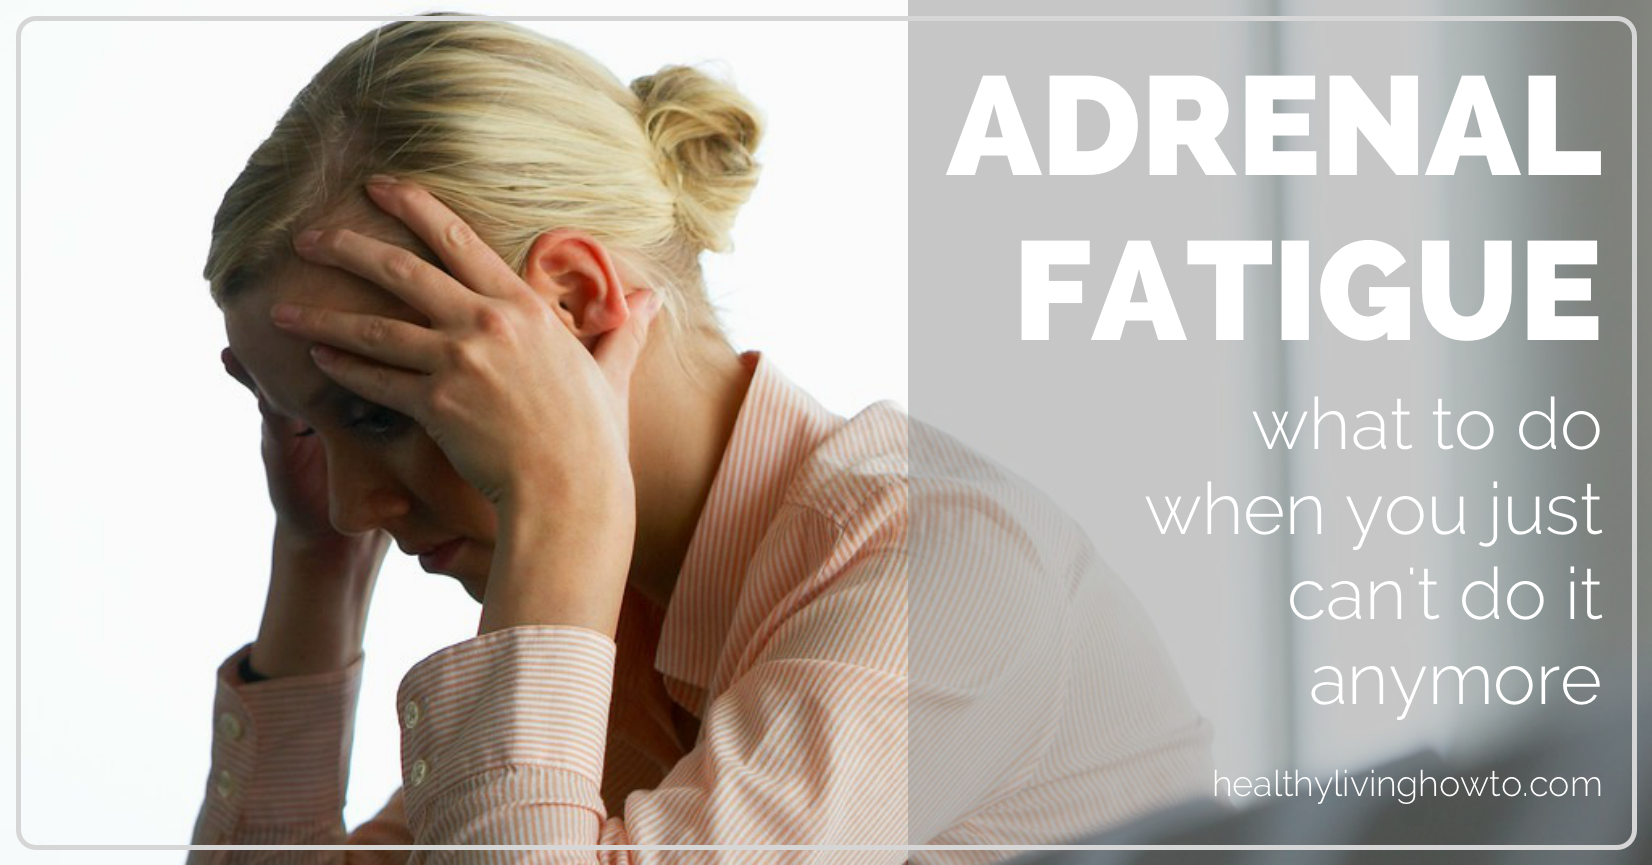 Adrenal Fatigue What To Do When You Just Can't Do It Anymore | healthylivinghowto.com